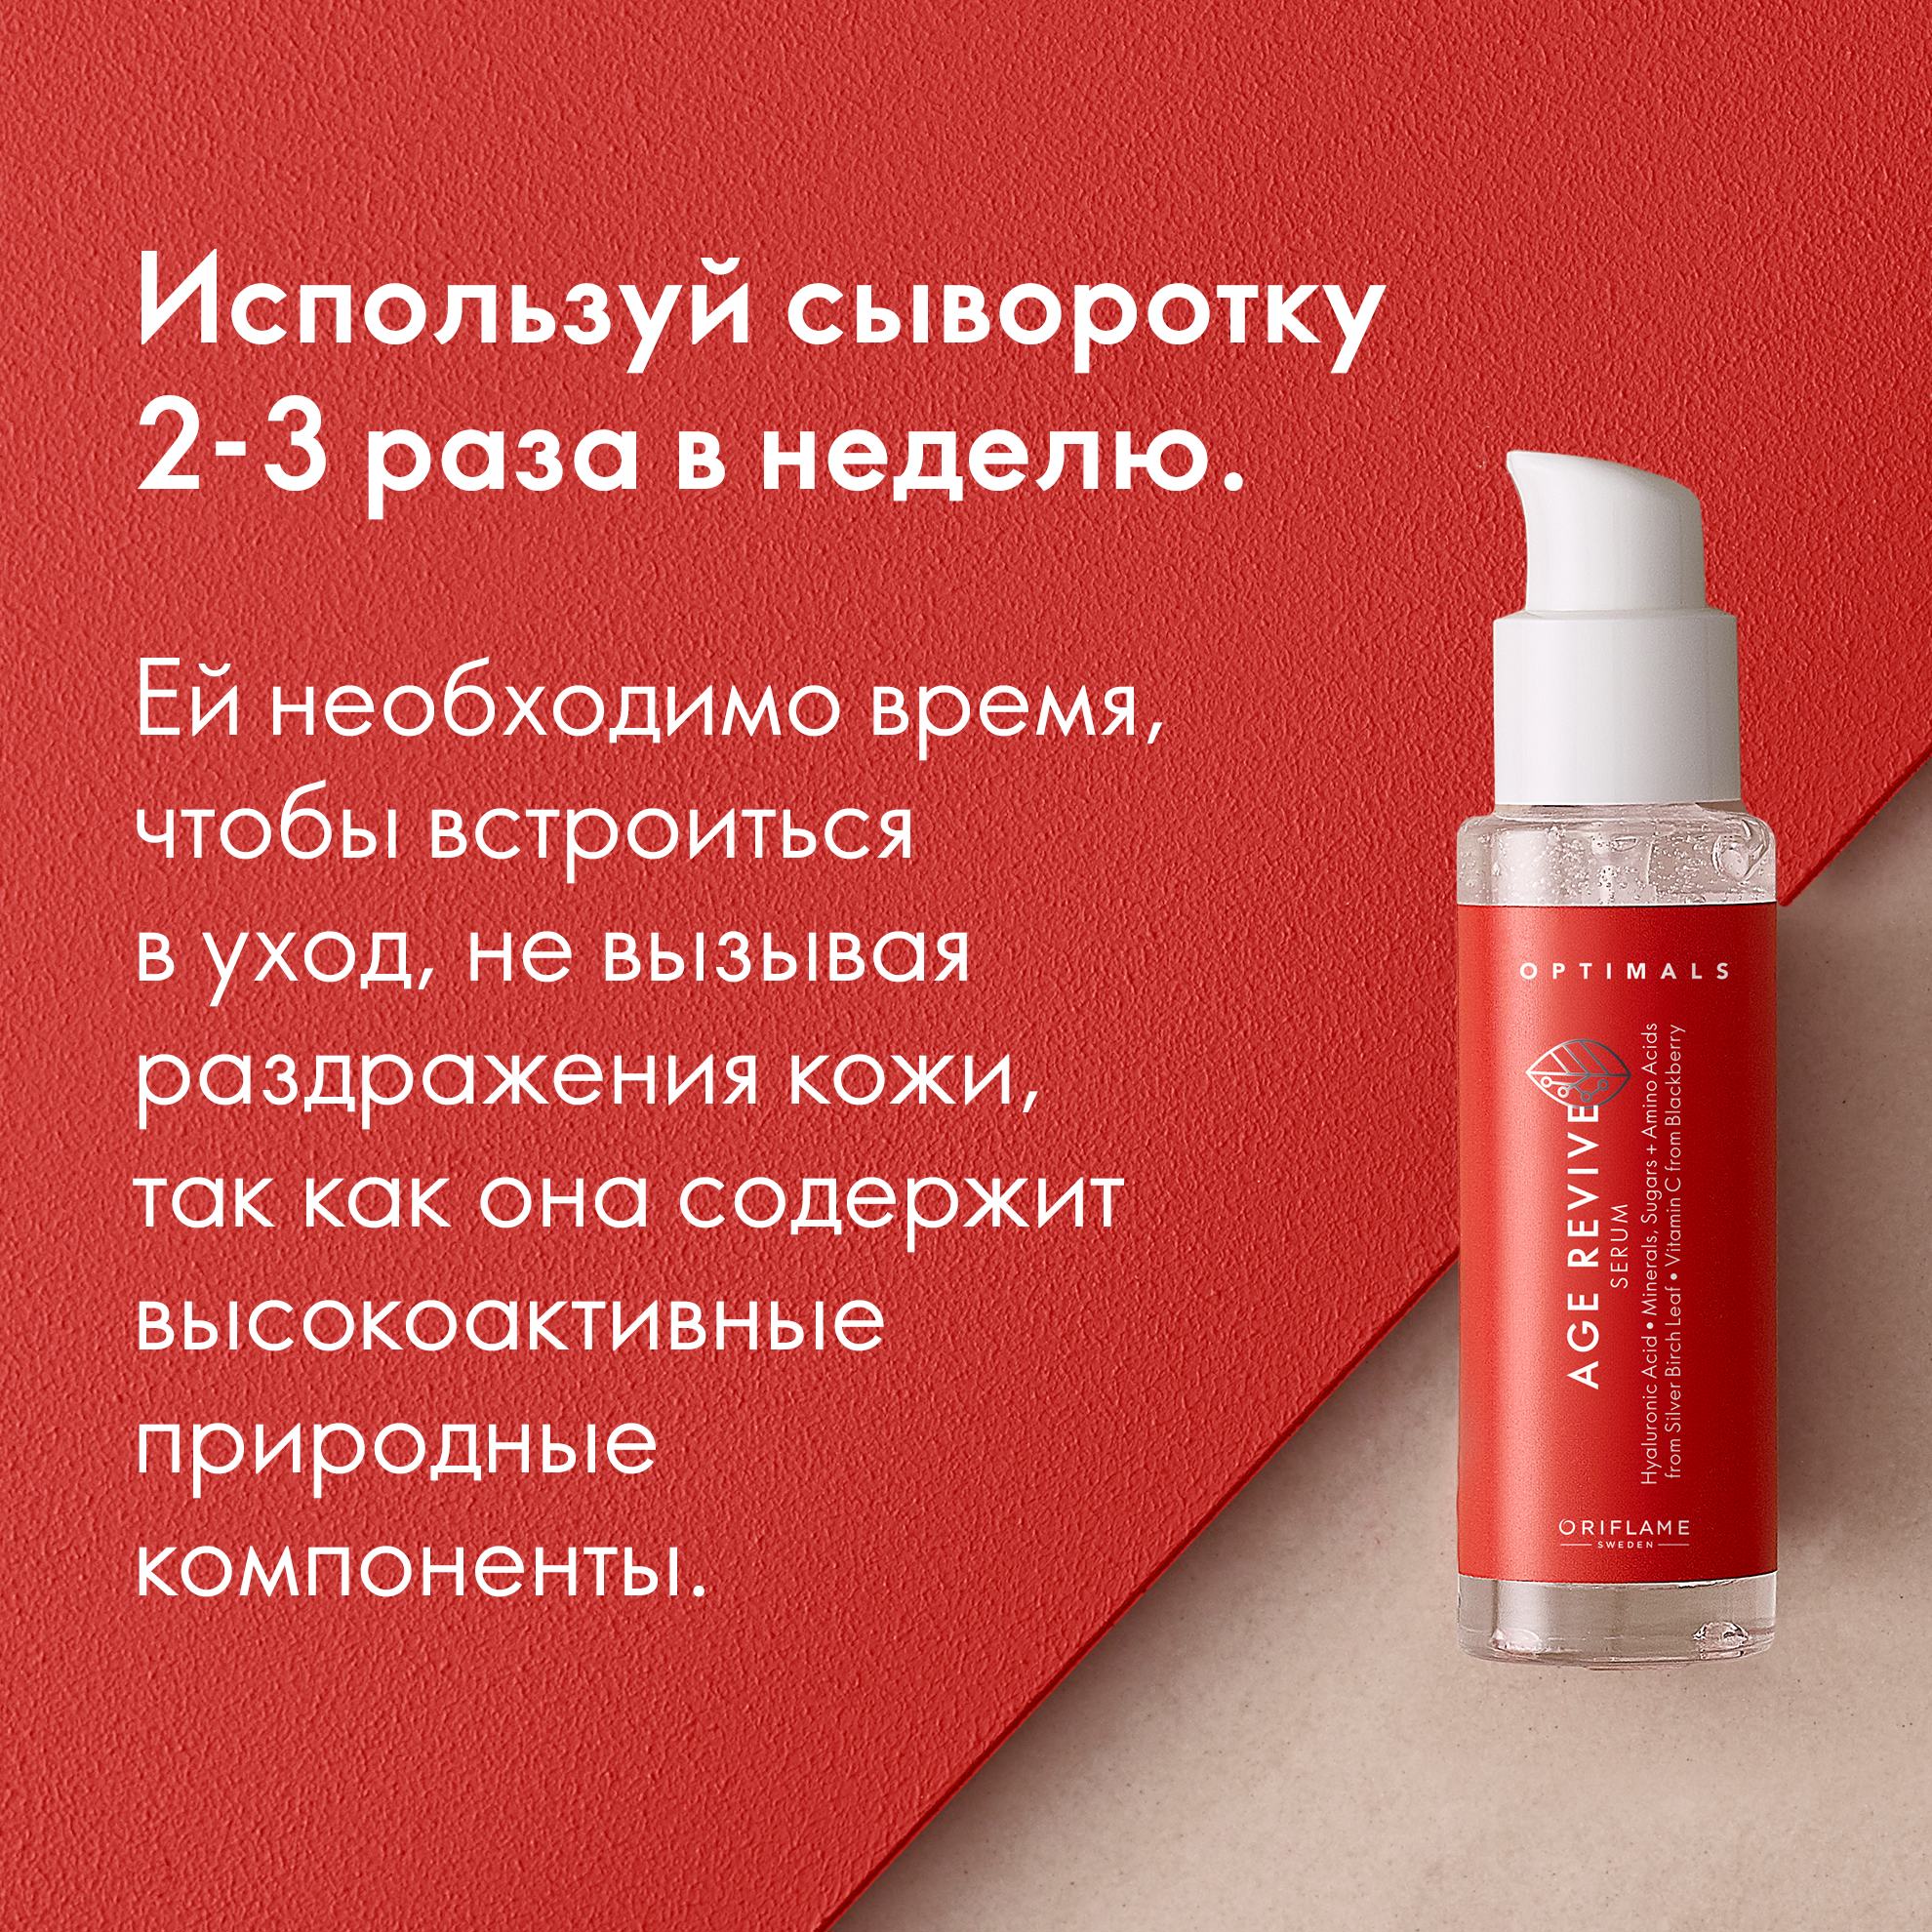 https://media-cdn.oriflame.com/productImage?externalMediaId=product-management-media%2fProducts%2f42551%2fBY%2f42551_5.png&id=15087739&version=1